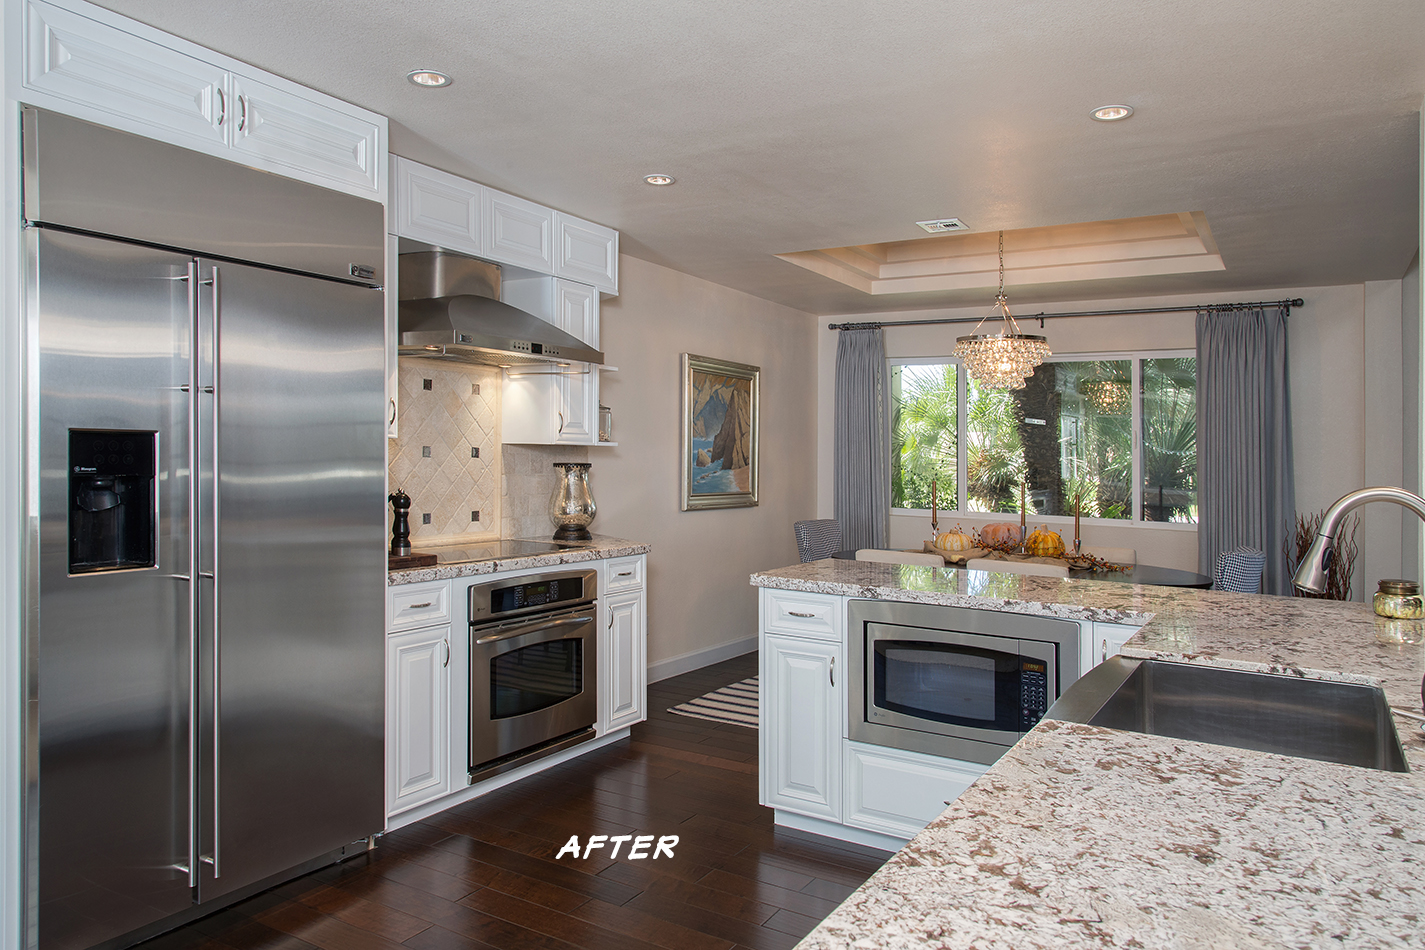 Gainey Ranch kitchen remodeling contractor Hochuli Design and Remodel Team